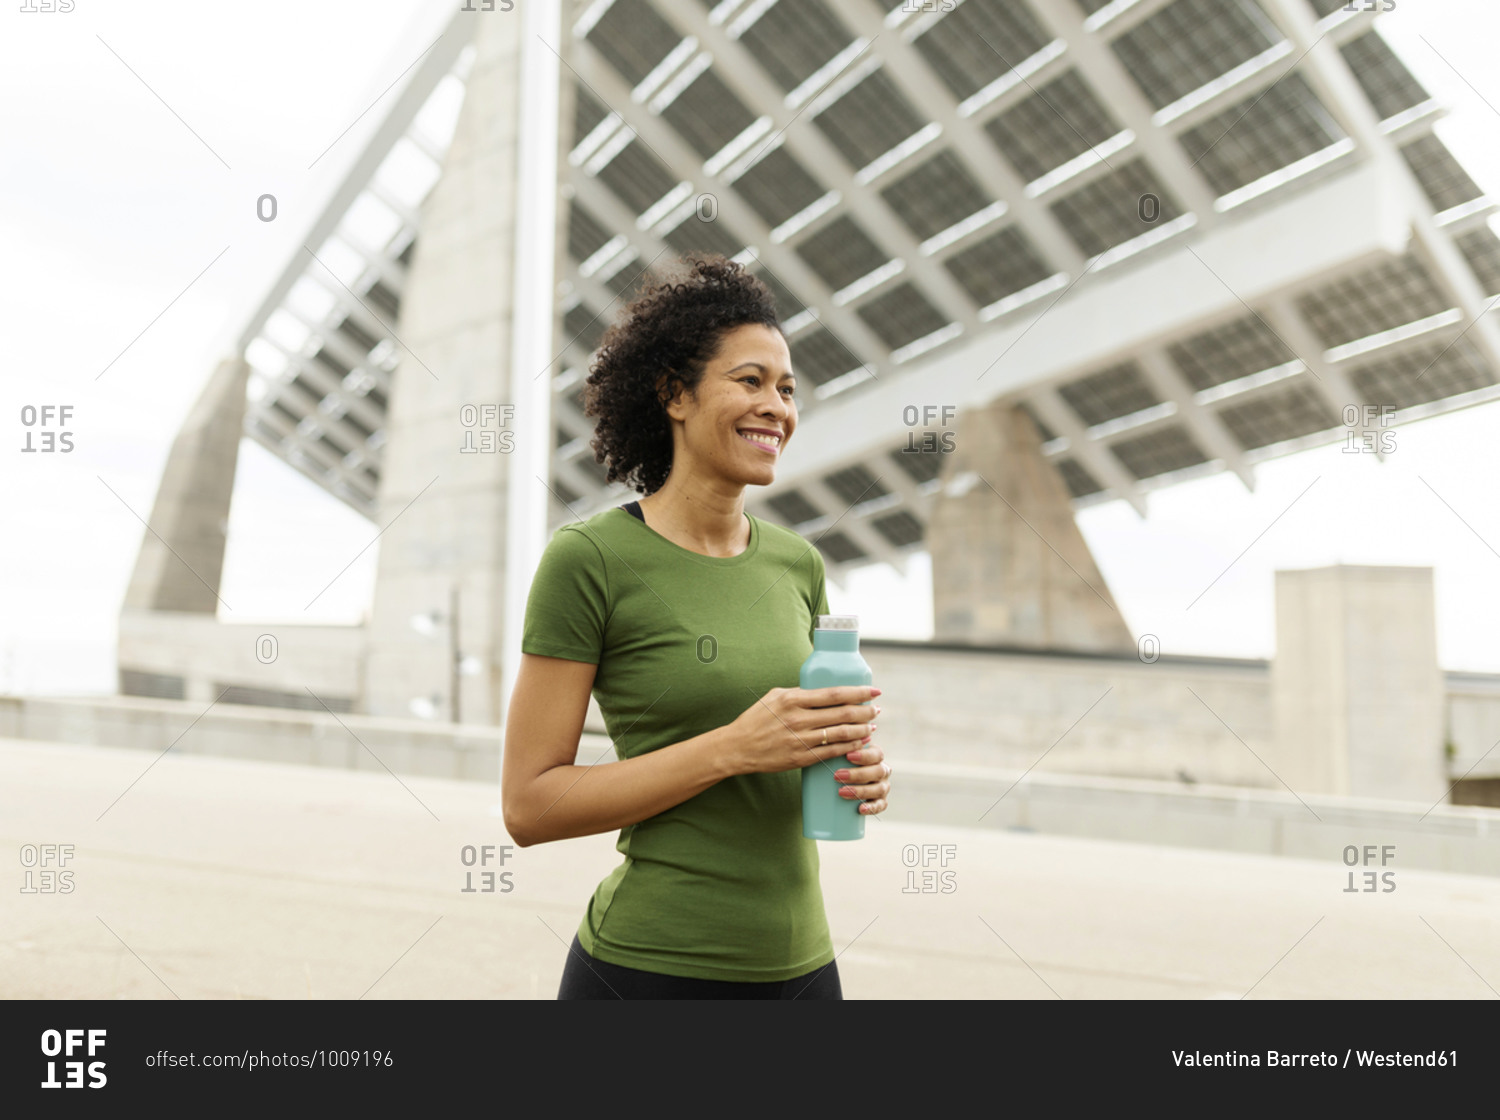 Smiling woman holding water bottle looking away while standing against built structure in city